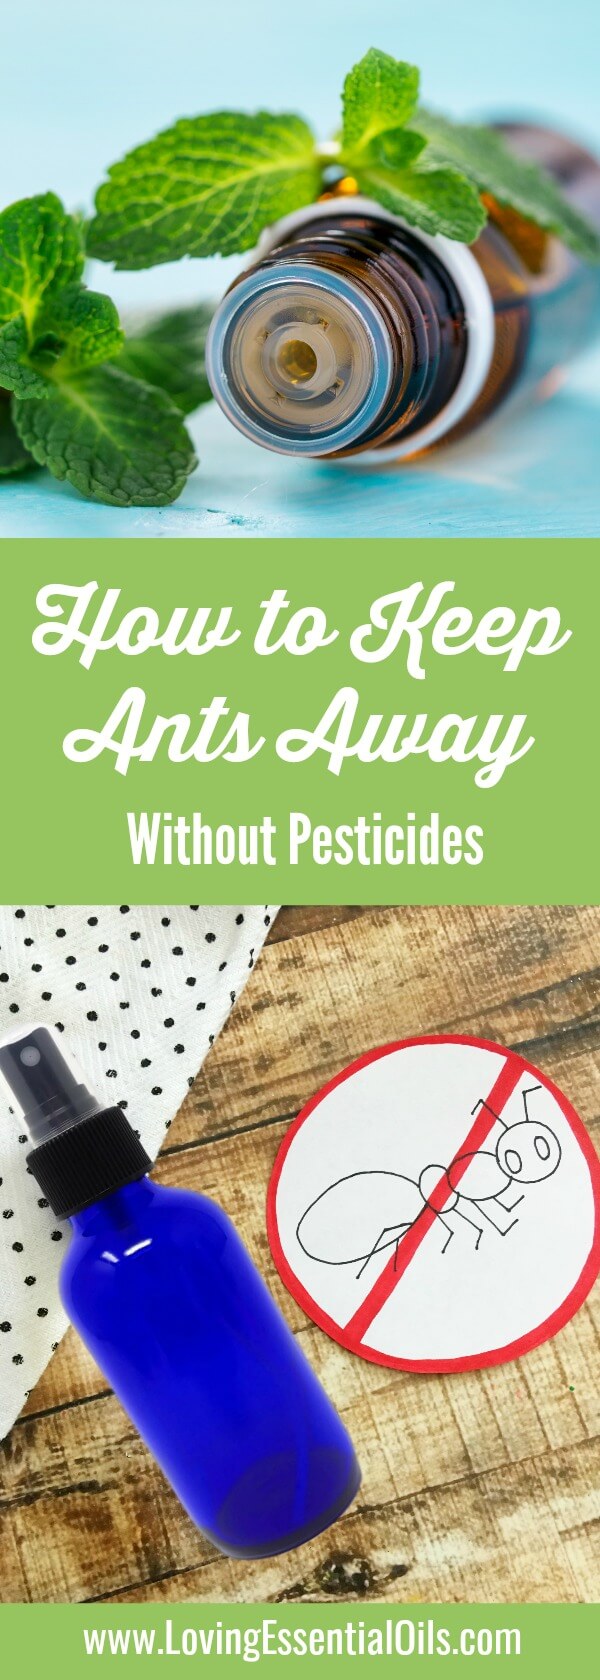 How to Keep Ants Away Without Pesticides Using Peppermit Essential Oil by Loving Essential Oils